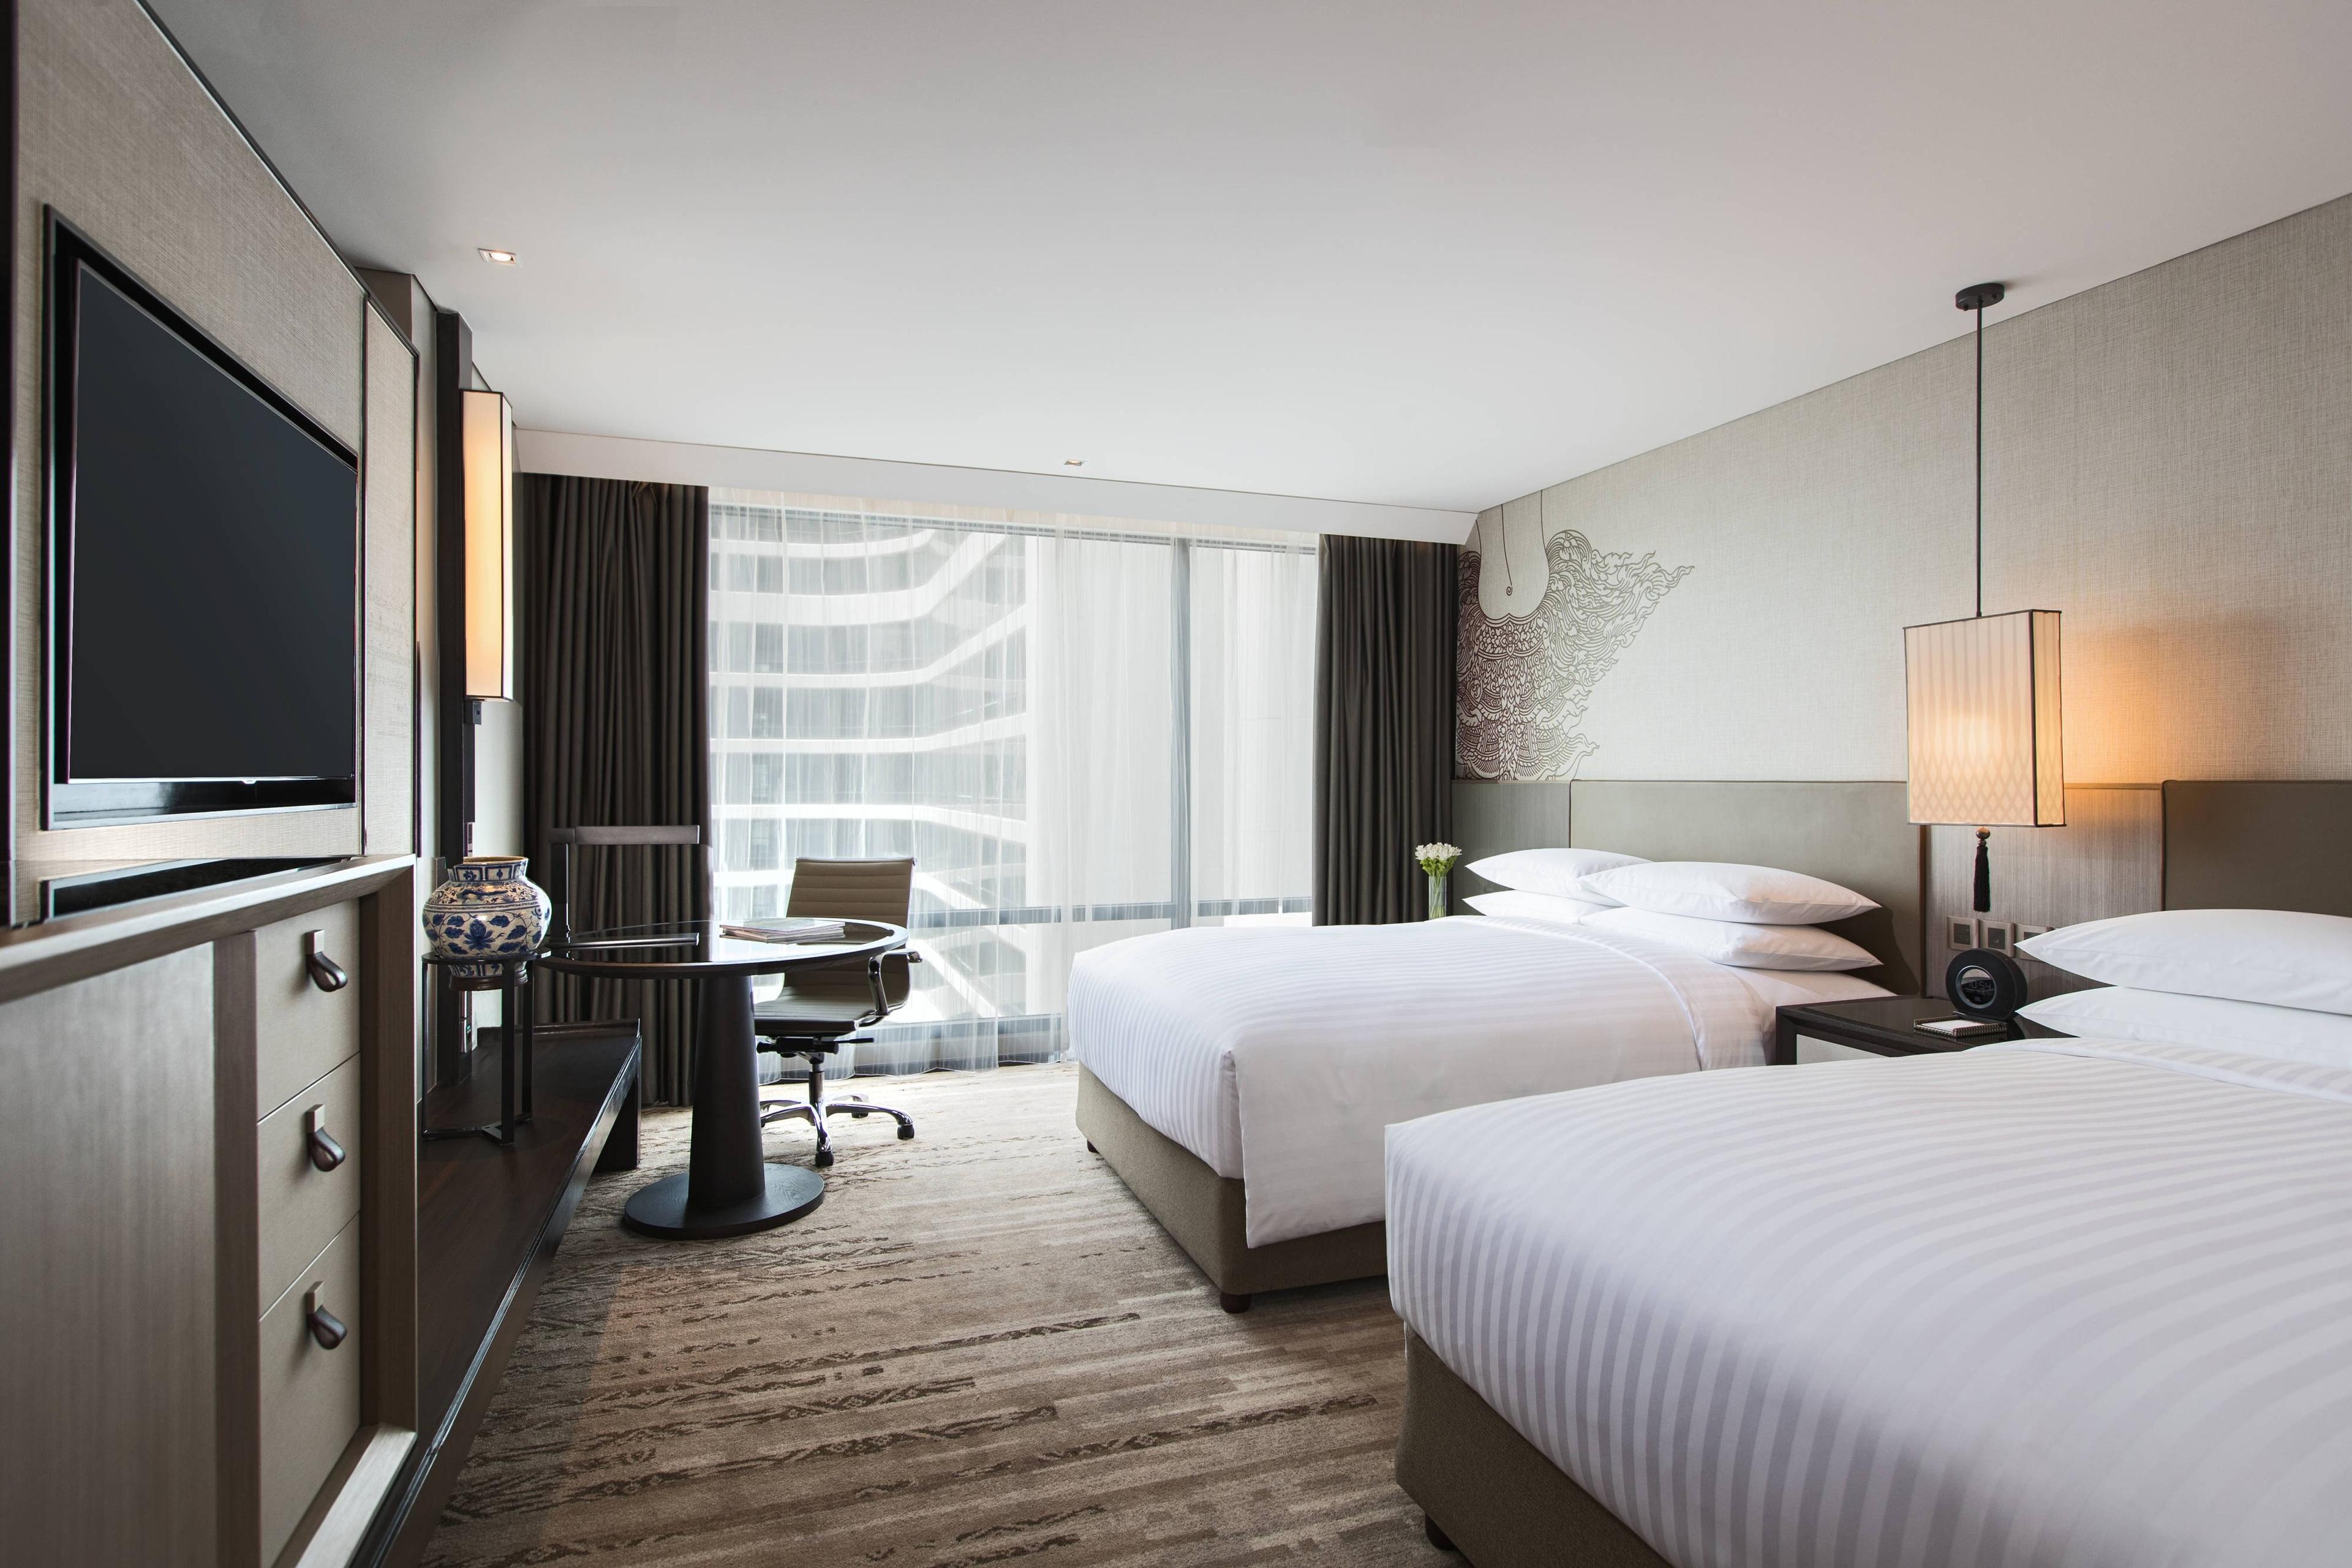 Our Double/Double Deluxe Guest Rooms provide a brilliant blend of functionality and style. All rooms feature floor-to-ceiling windows, the latest technology and our luxurious Revive bedding collection.